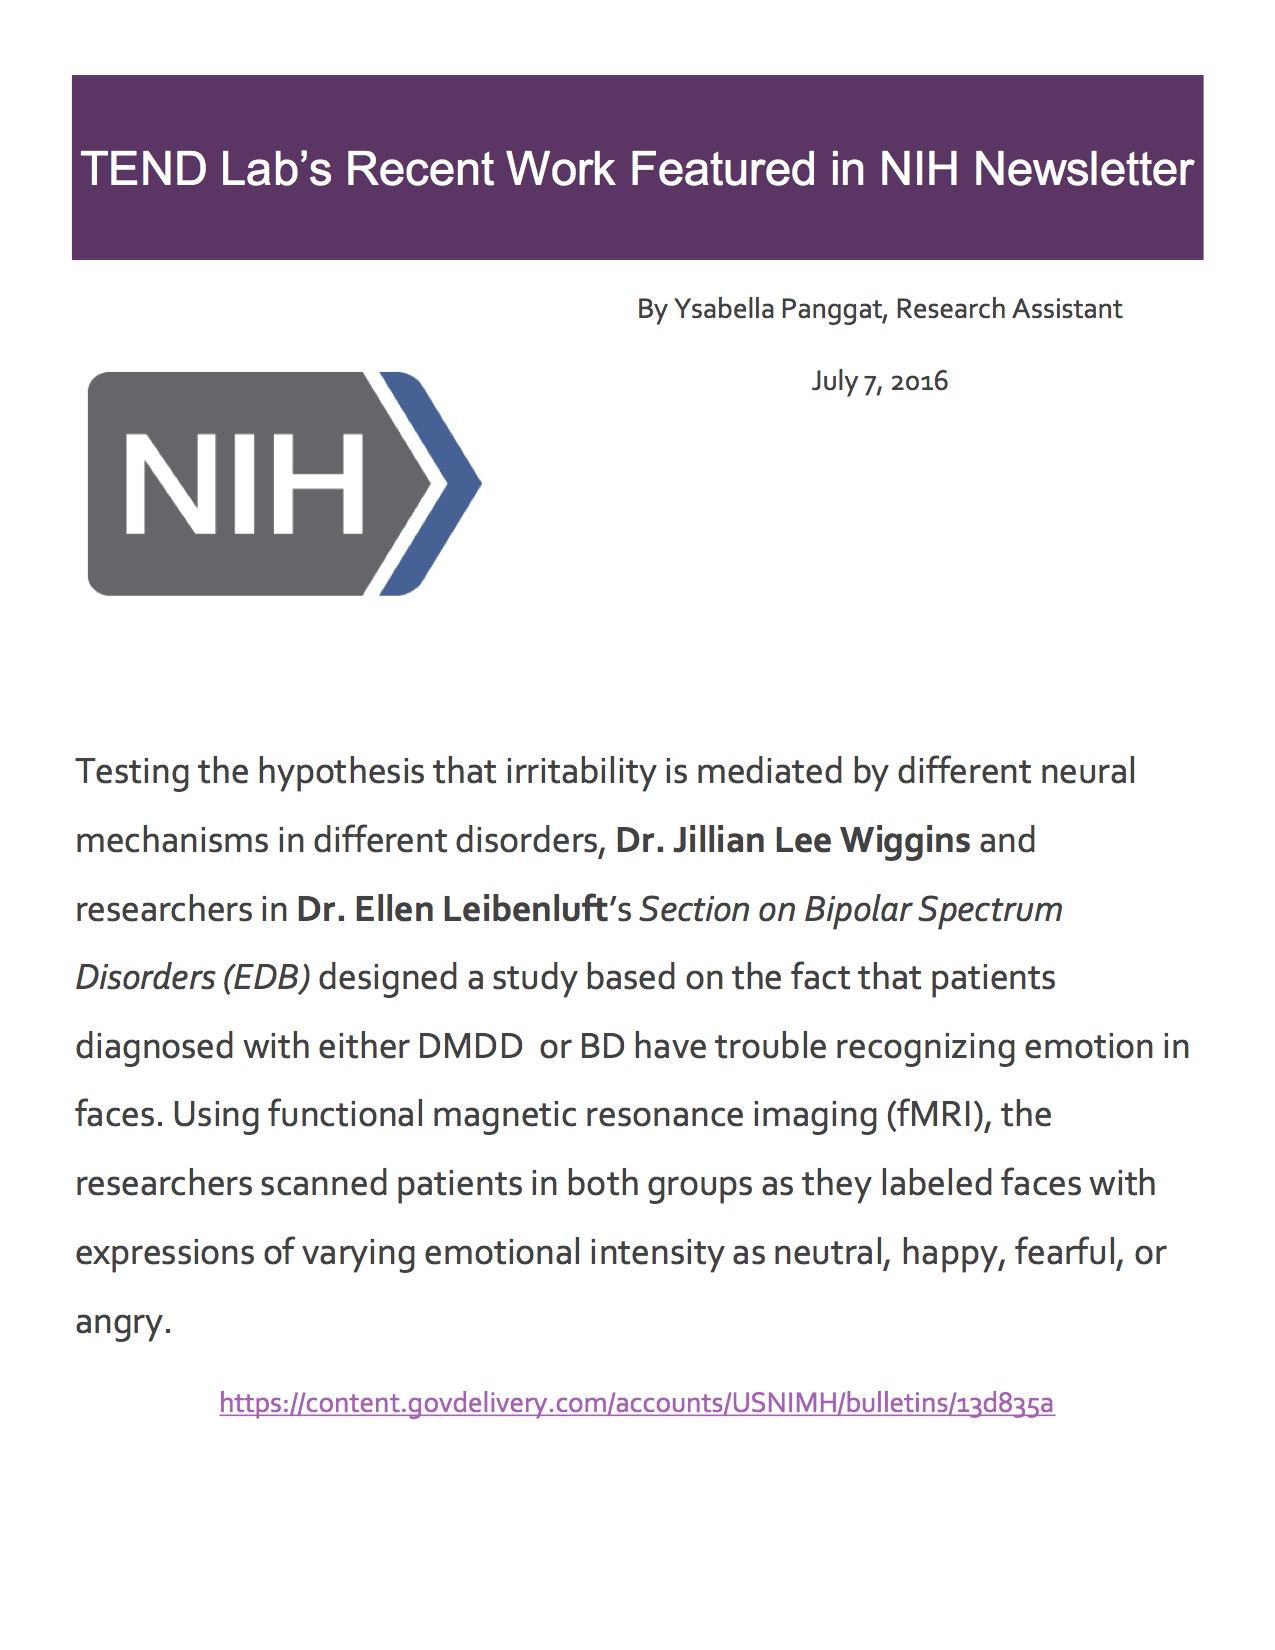 NIH newsletter article page 1 titled "TEND Lab’s Recent Work Featured in NIH Newsletter"